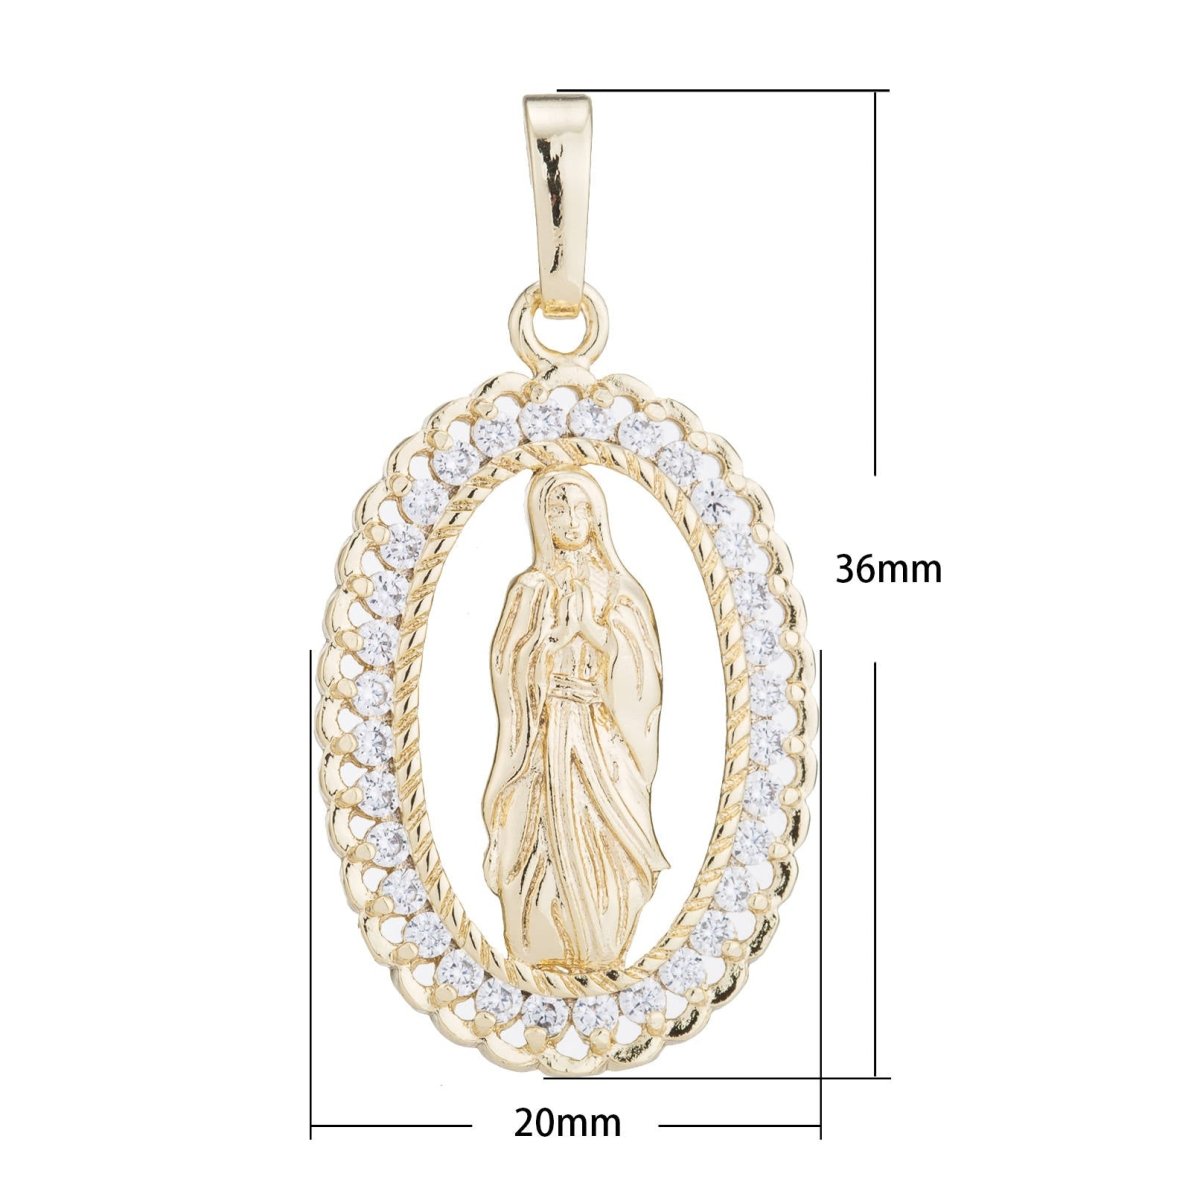 Holy Mother Virgin Mary Pray For Us Gold Filled Necklace, Vintage Design Pendant Cubic Zirconia, Religious Catholic Findings Jewelry H-183 I-755 - DLUXCA